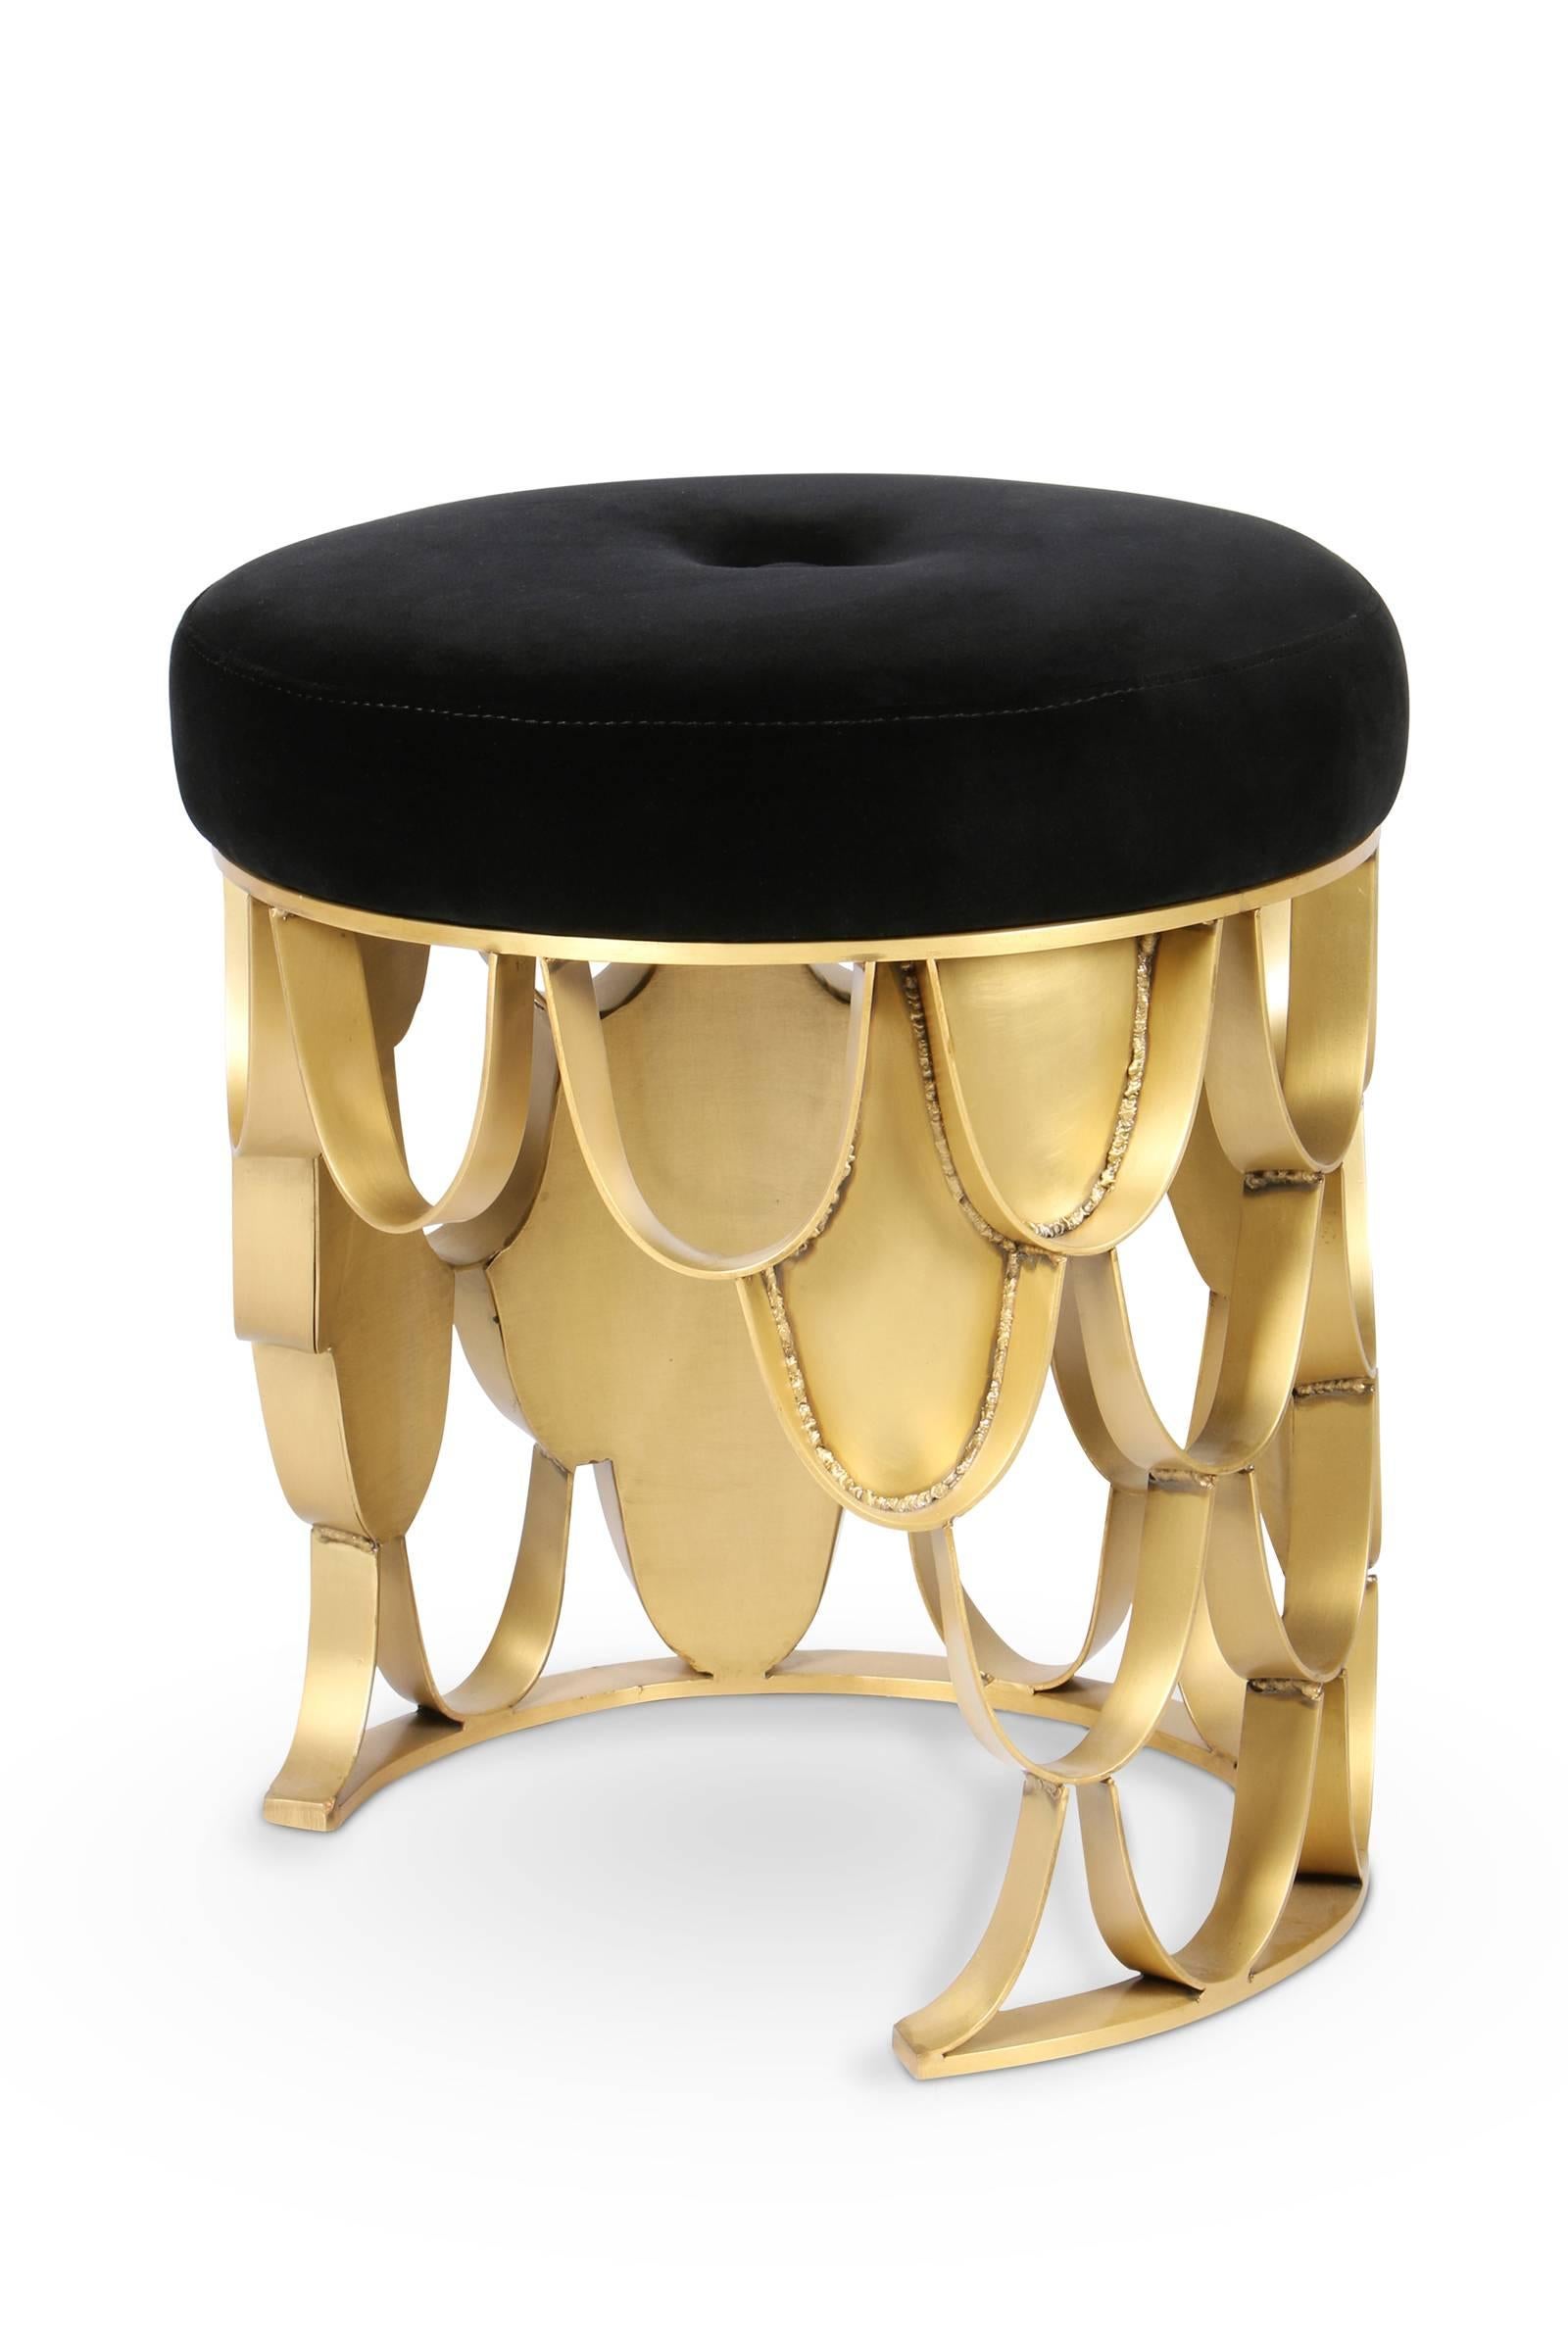 Stool Carpus with brushed aged brass base
structure. Seat in upholstery velvet fabric.
